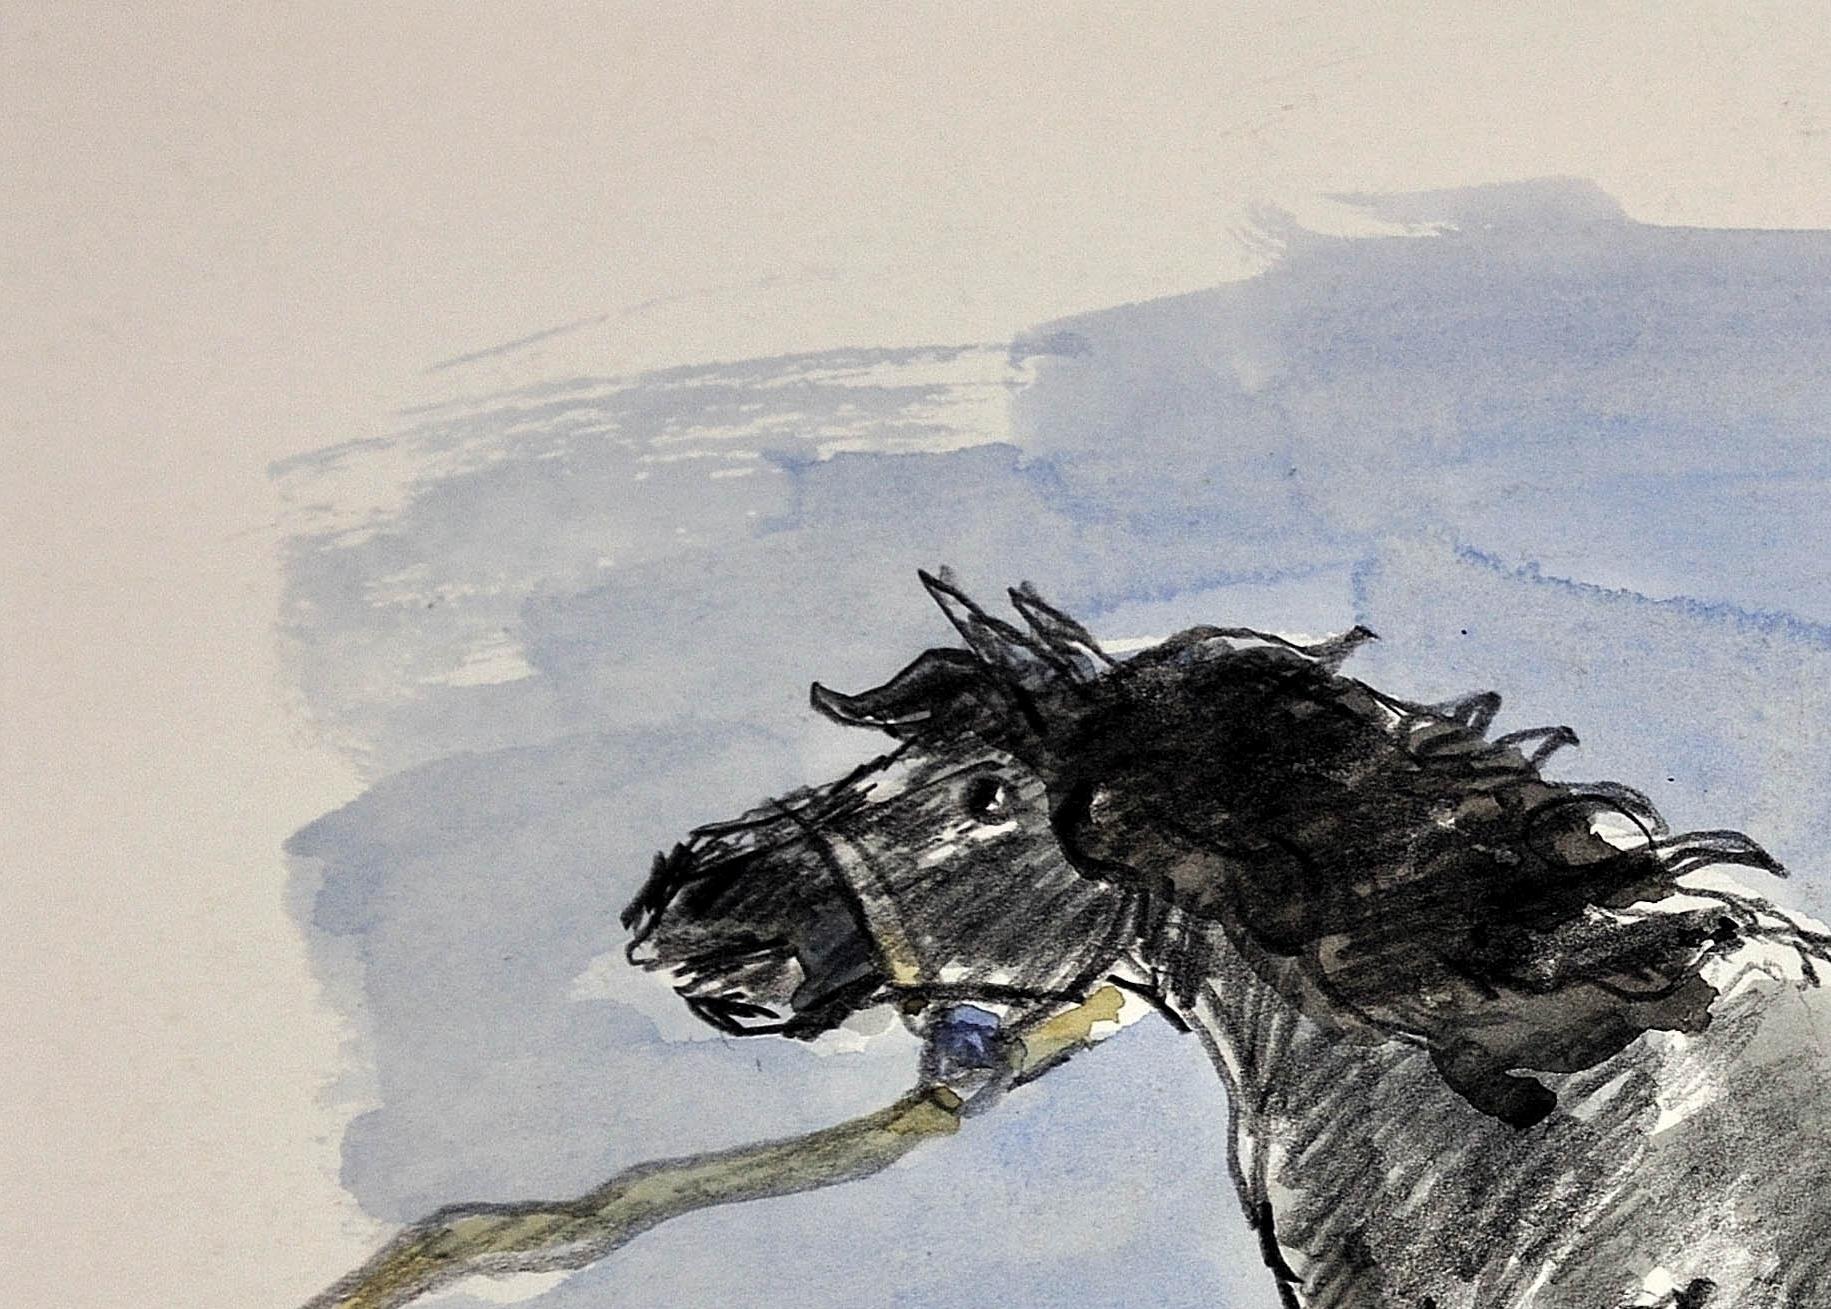 TWO FOR THE PRICE OF ONE - LITERALLY !!
An original pencil and watercolour drawing of a Pony by Sir Kyffin Williams. The paper has another drawing by the artist on the reverse of a farmer standing with a stick by a stone wall.
The watercolour and